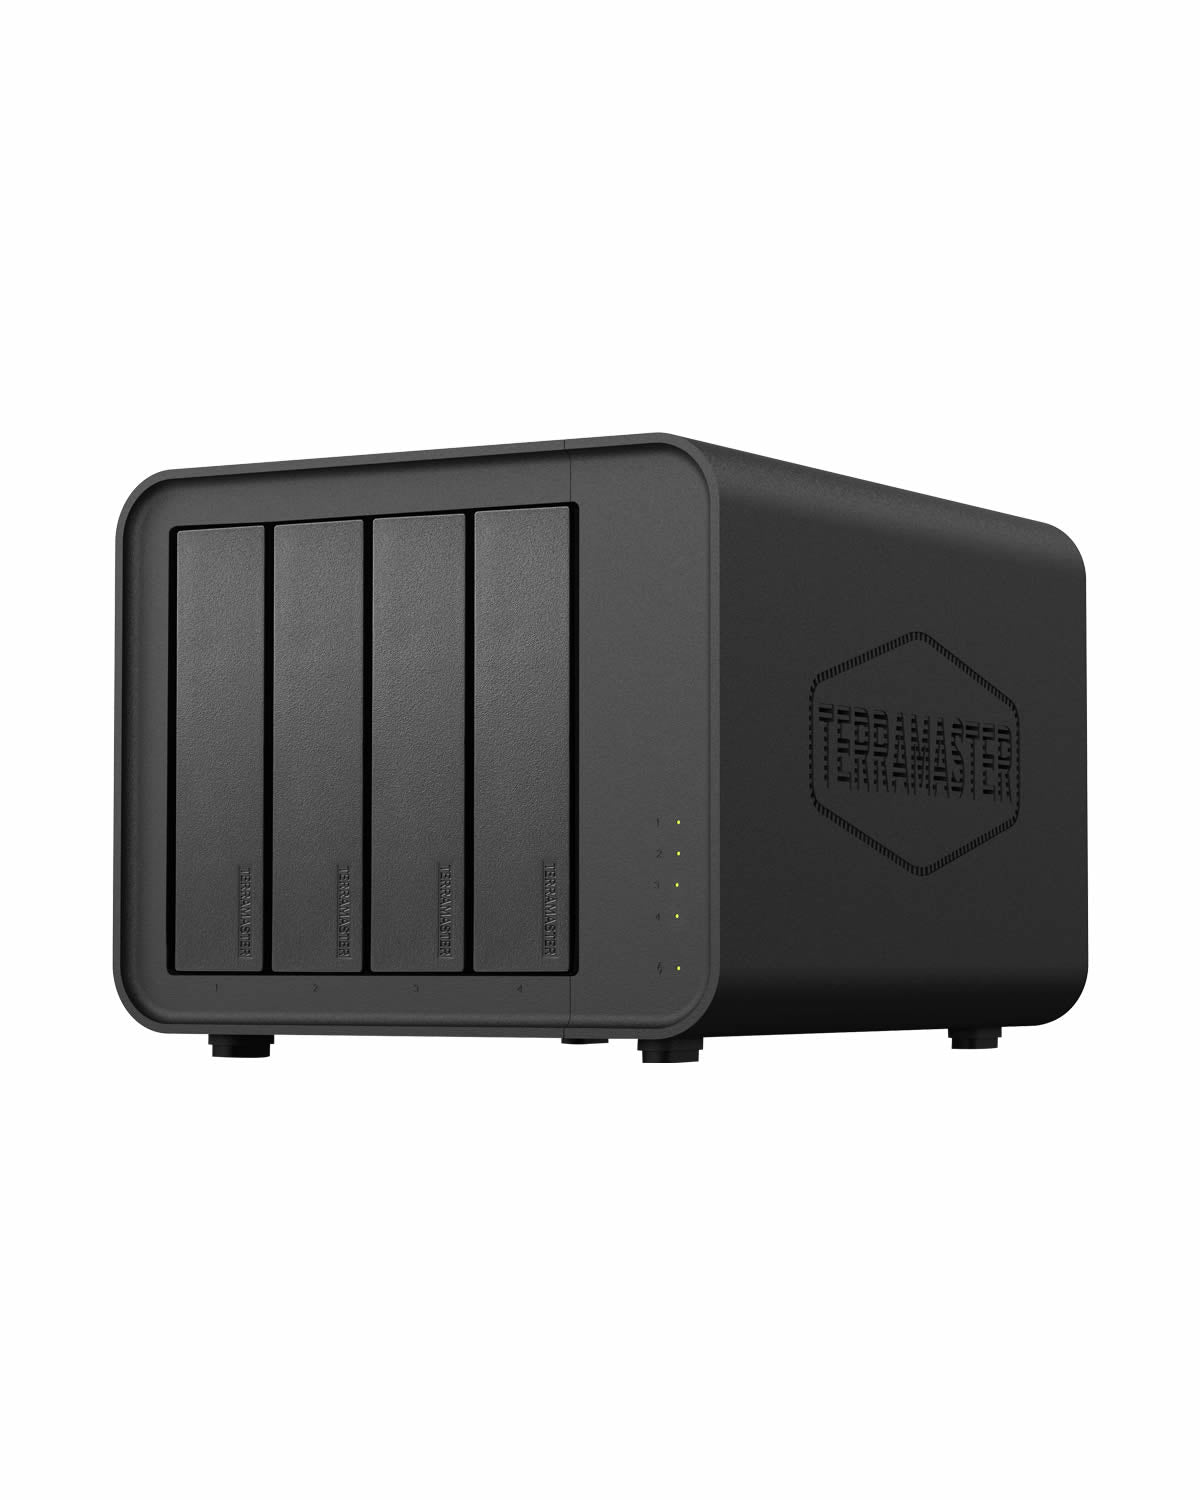 TERRAMASTER F4-424 NAS 4Bay – Intel N95/N100 Quad-Core CPU, 8GB DDR5, 2.5GbE LAN x 2, Network Attached Storage with High Performance (Diskless)